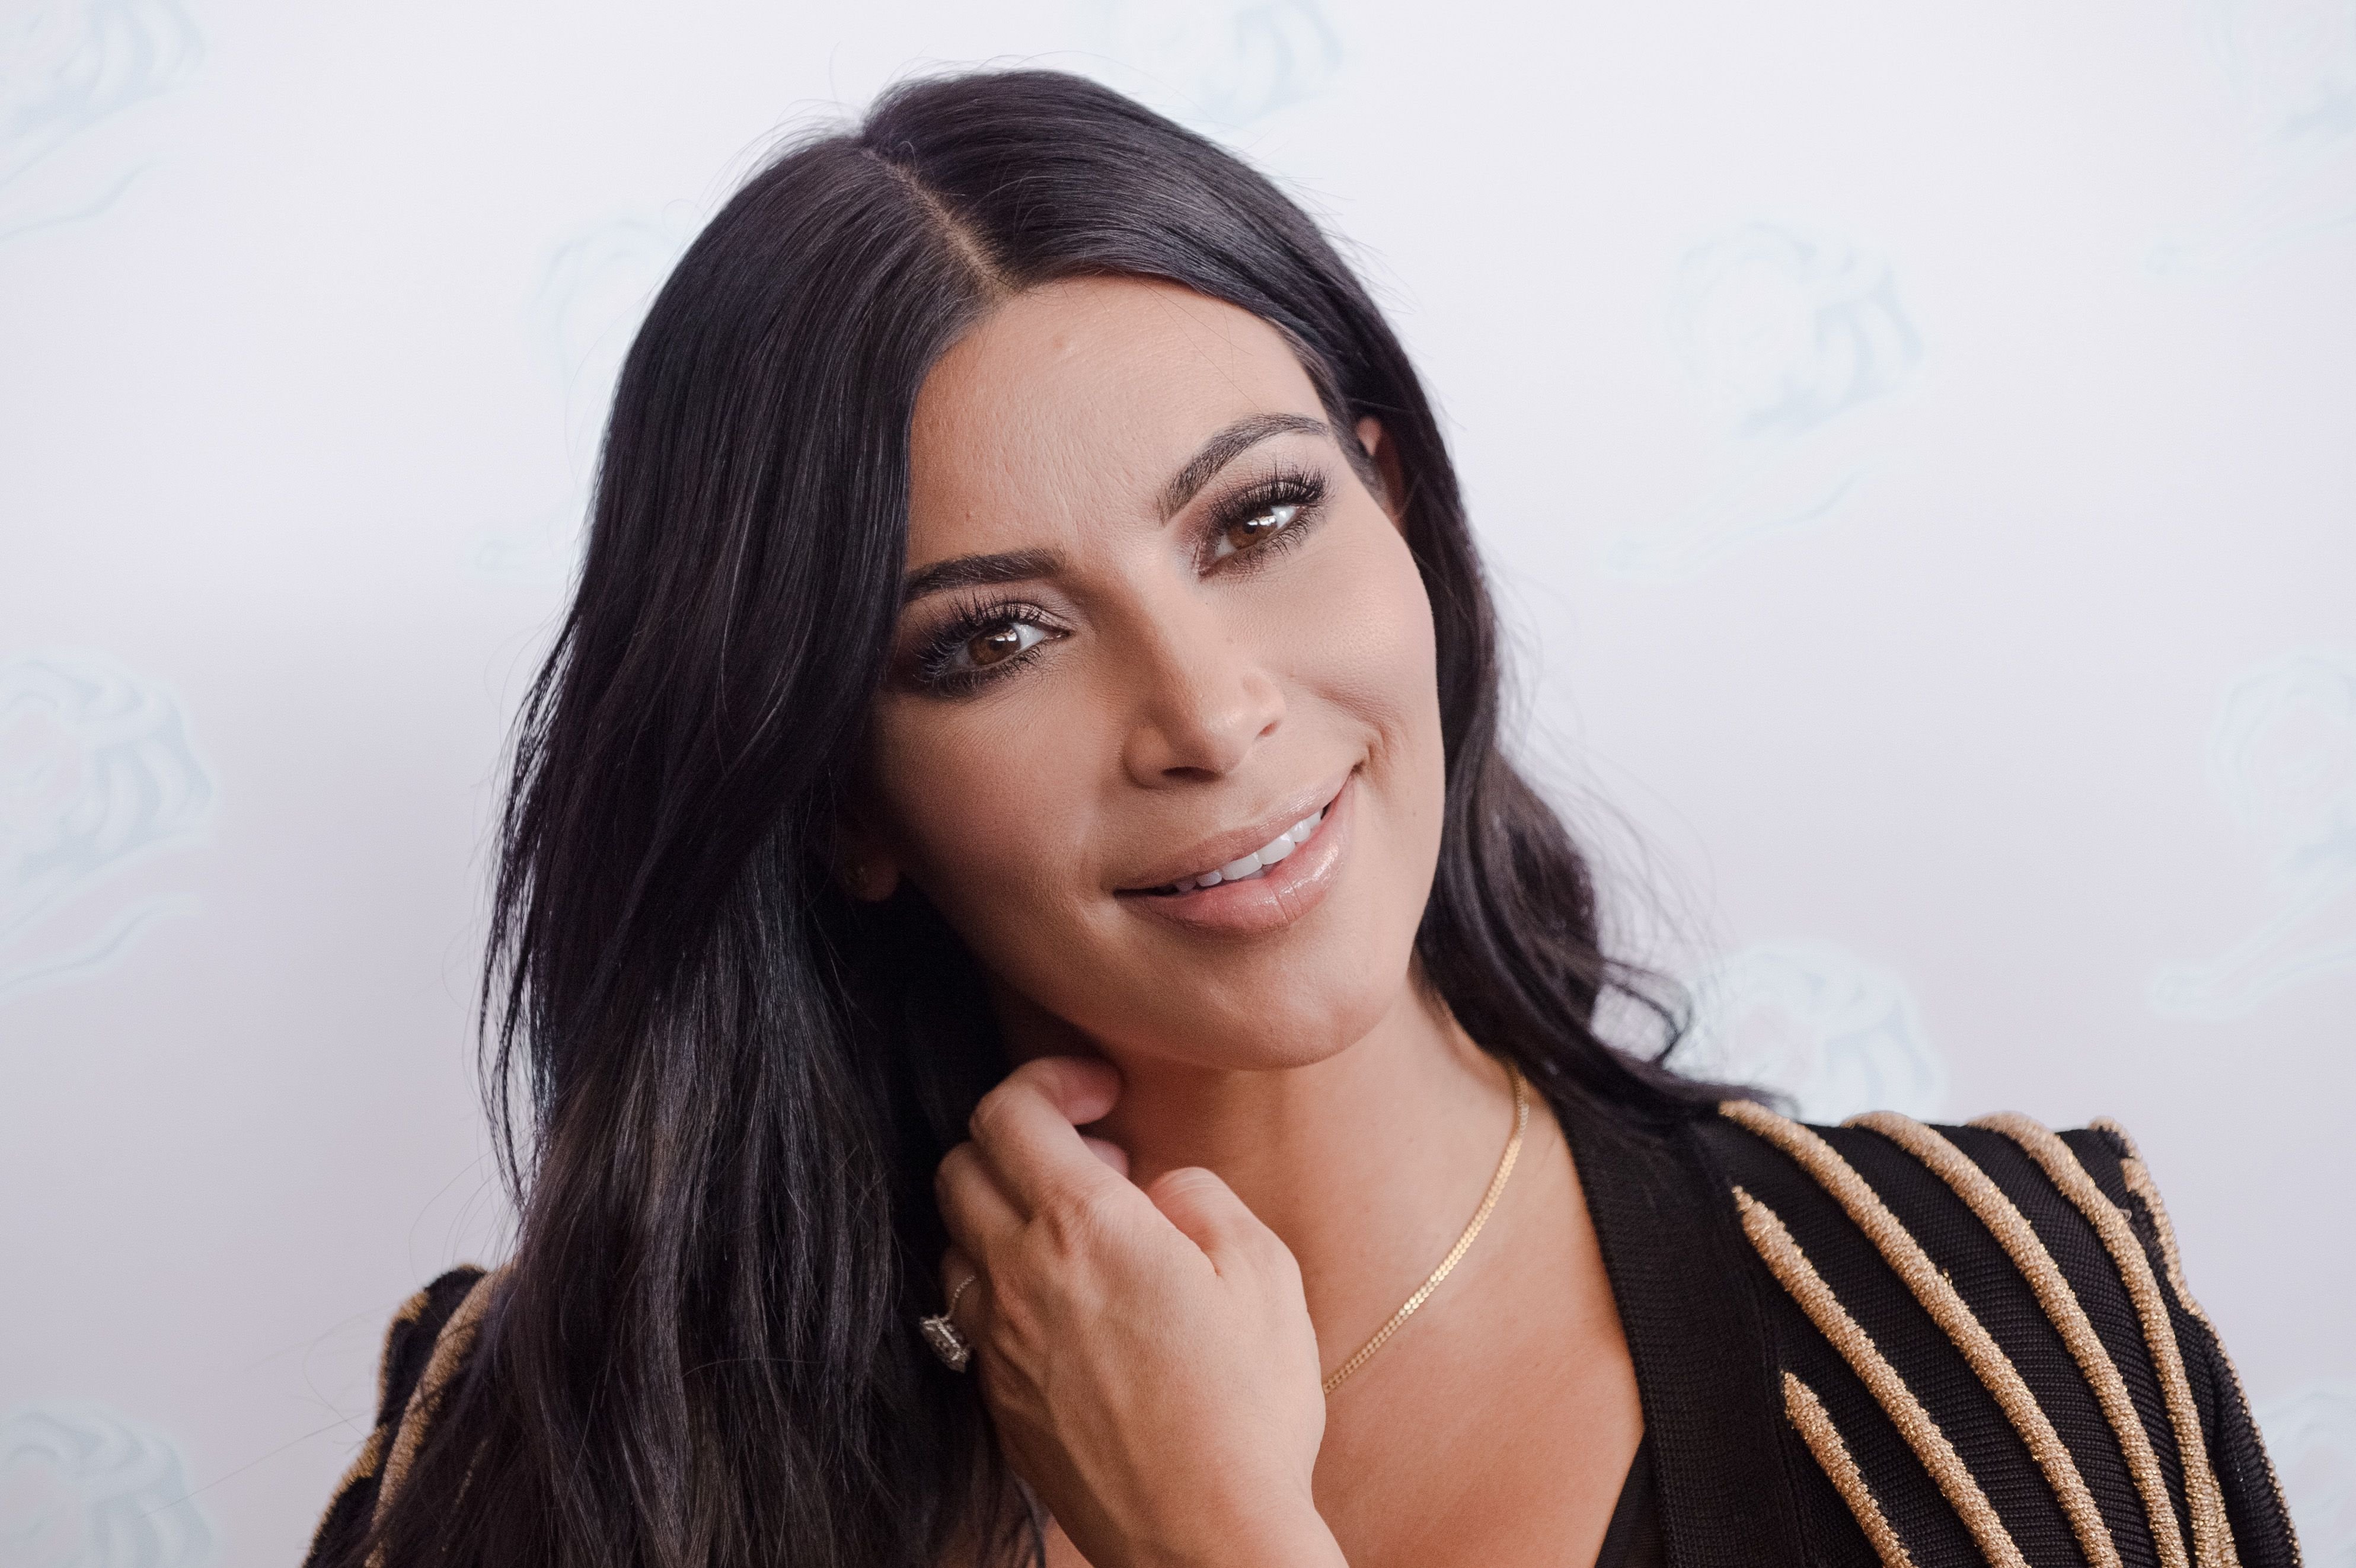 Kim Kardashian at a "Sudler" talk during Cannes Lions International Festival of Creativity on June 24, 2015, in Cannes, France | Photo: Francois G. Durand/Getty Images